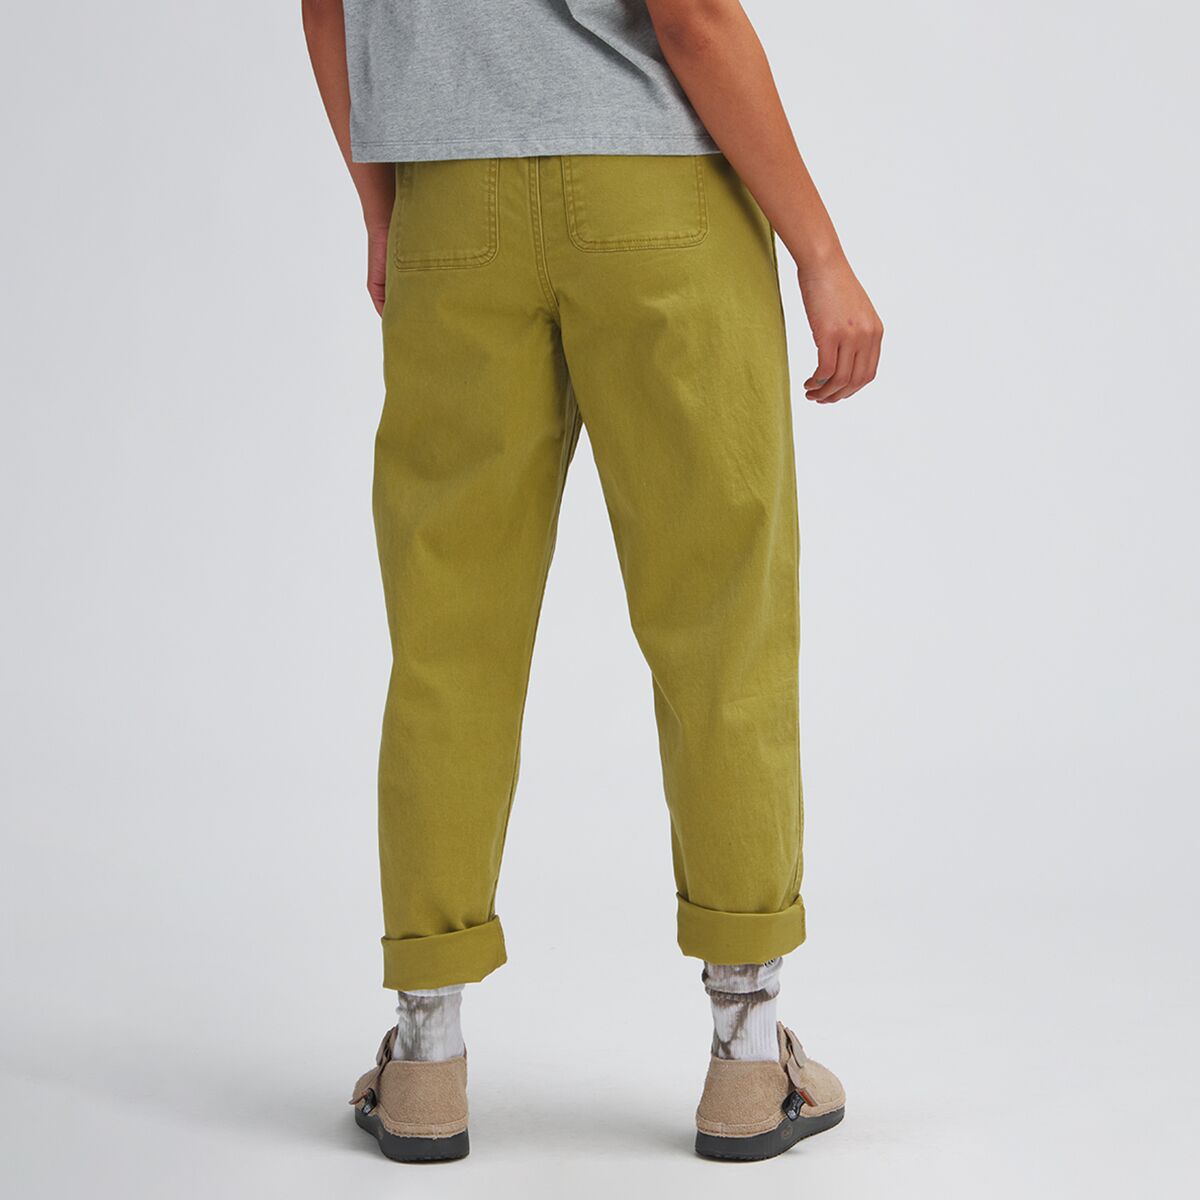 Best Quality Stoic Venture Pant - Women's Limit Offer delivery free United  States